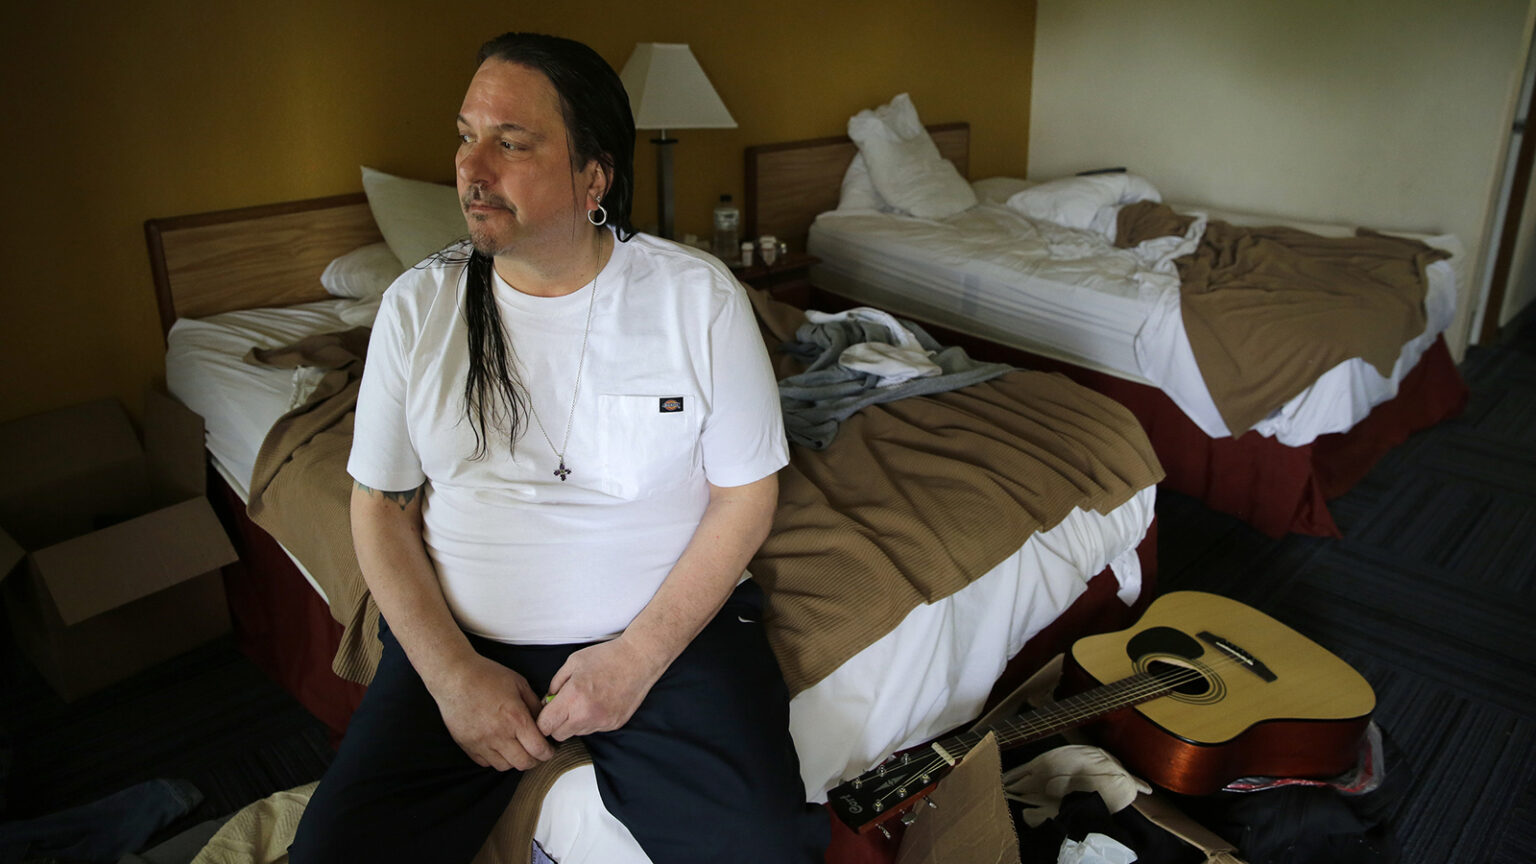 Christopher Kartsounes sitting on a bed in his room at an inn in Appleton, Wisconsin.